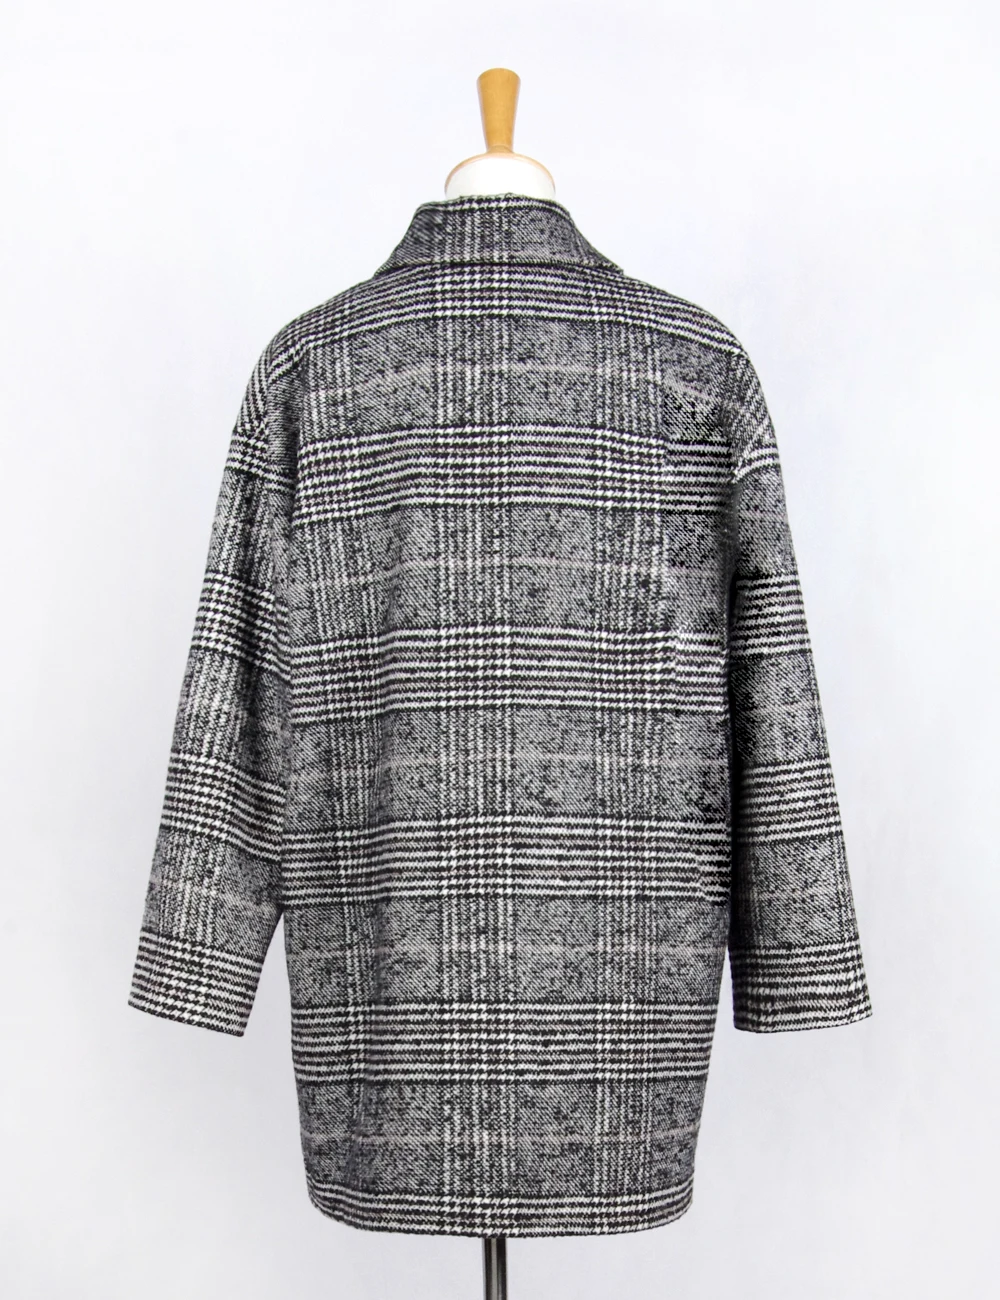 
Very Classic Fahion Winter Check Wool Coat Blend Women Fittede Long High Jackets 